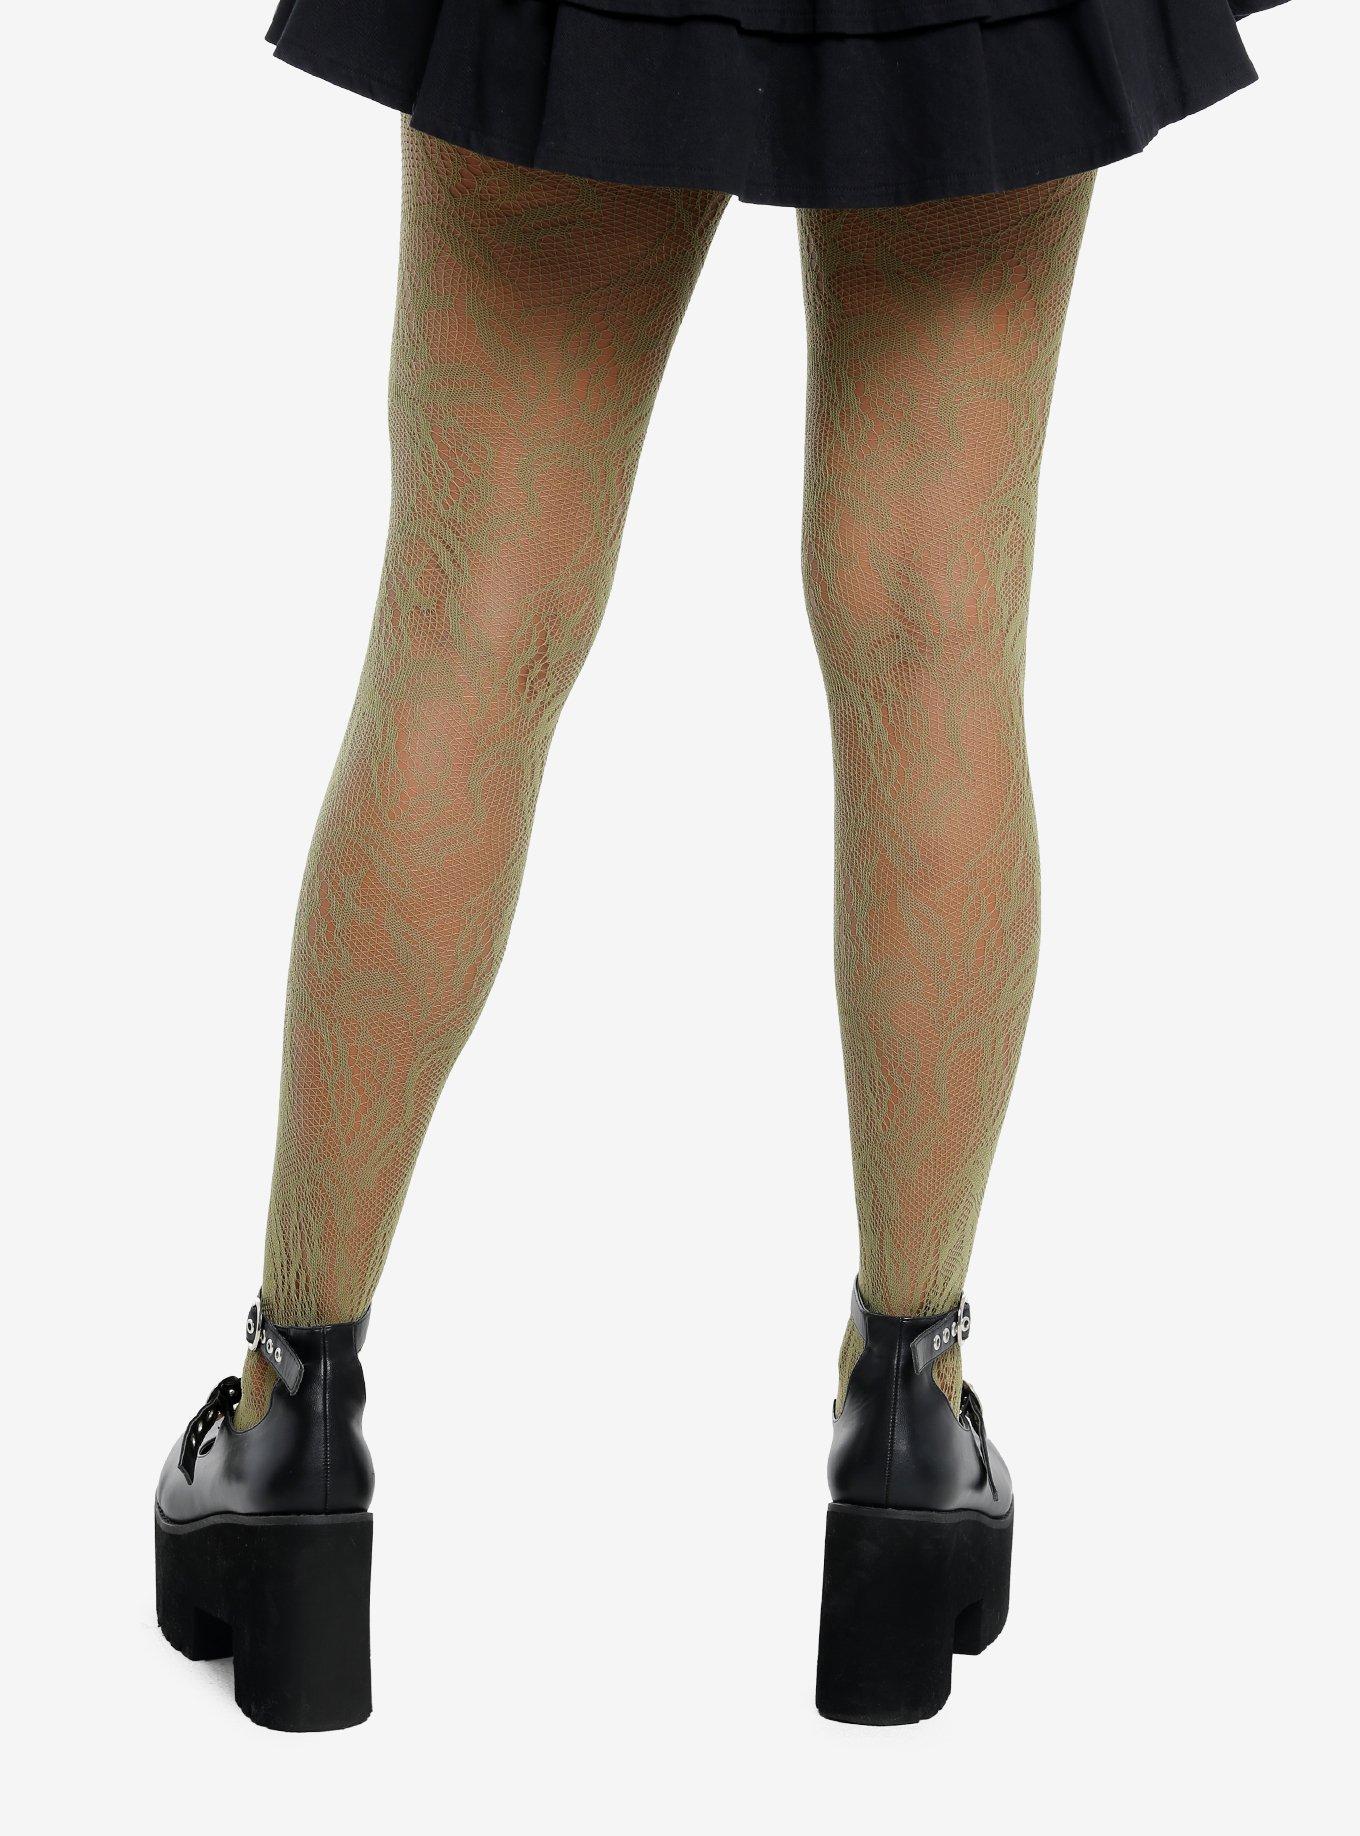 Hot Topic Green Floral Fishnet Tights